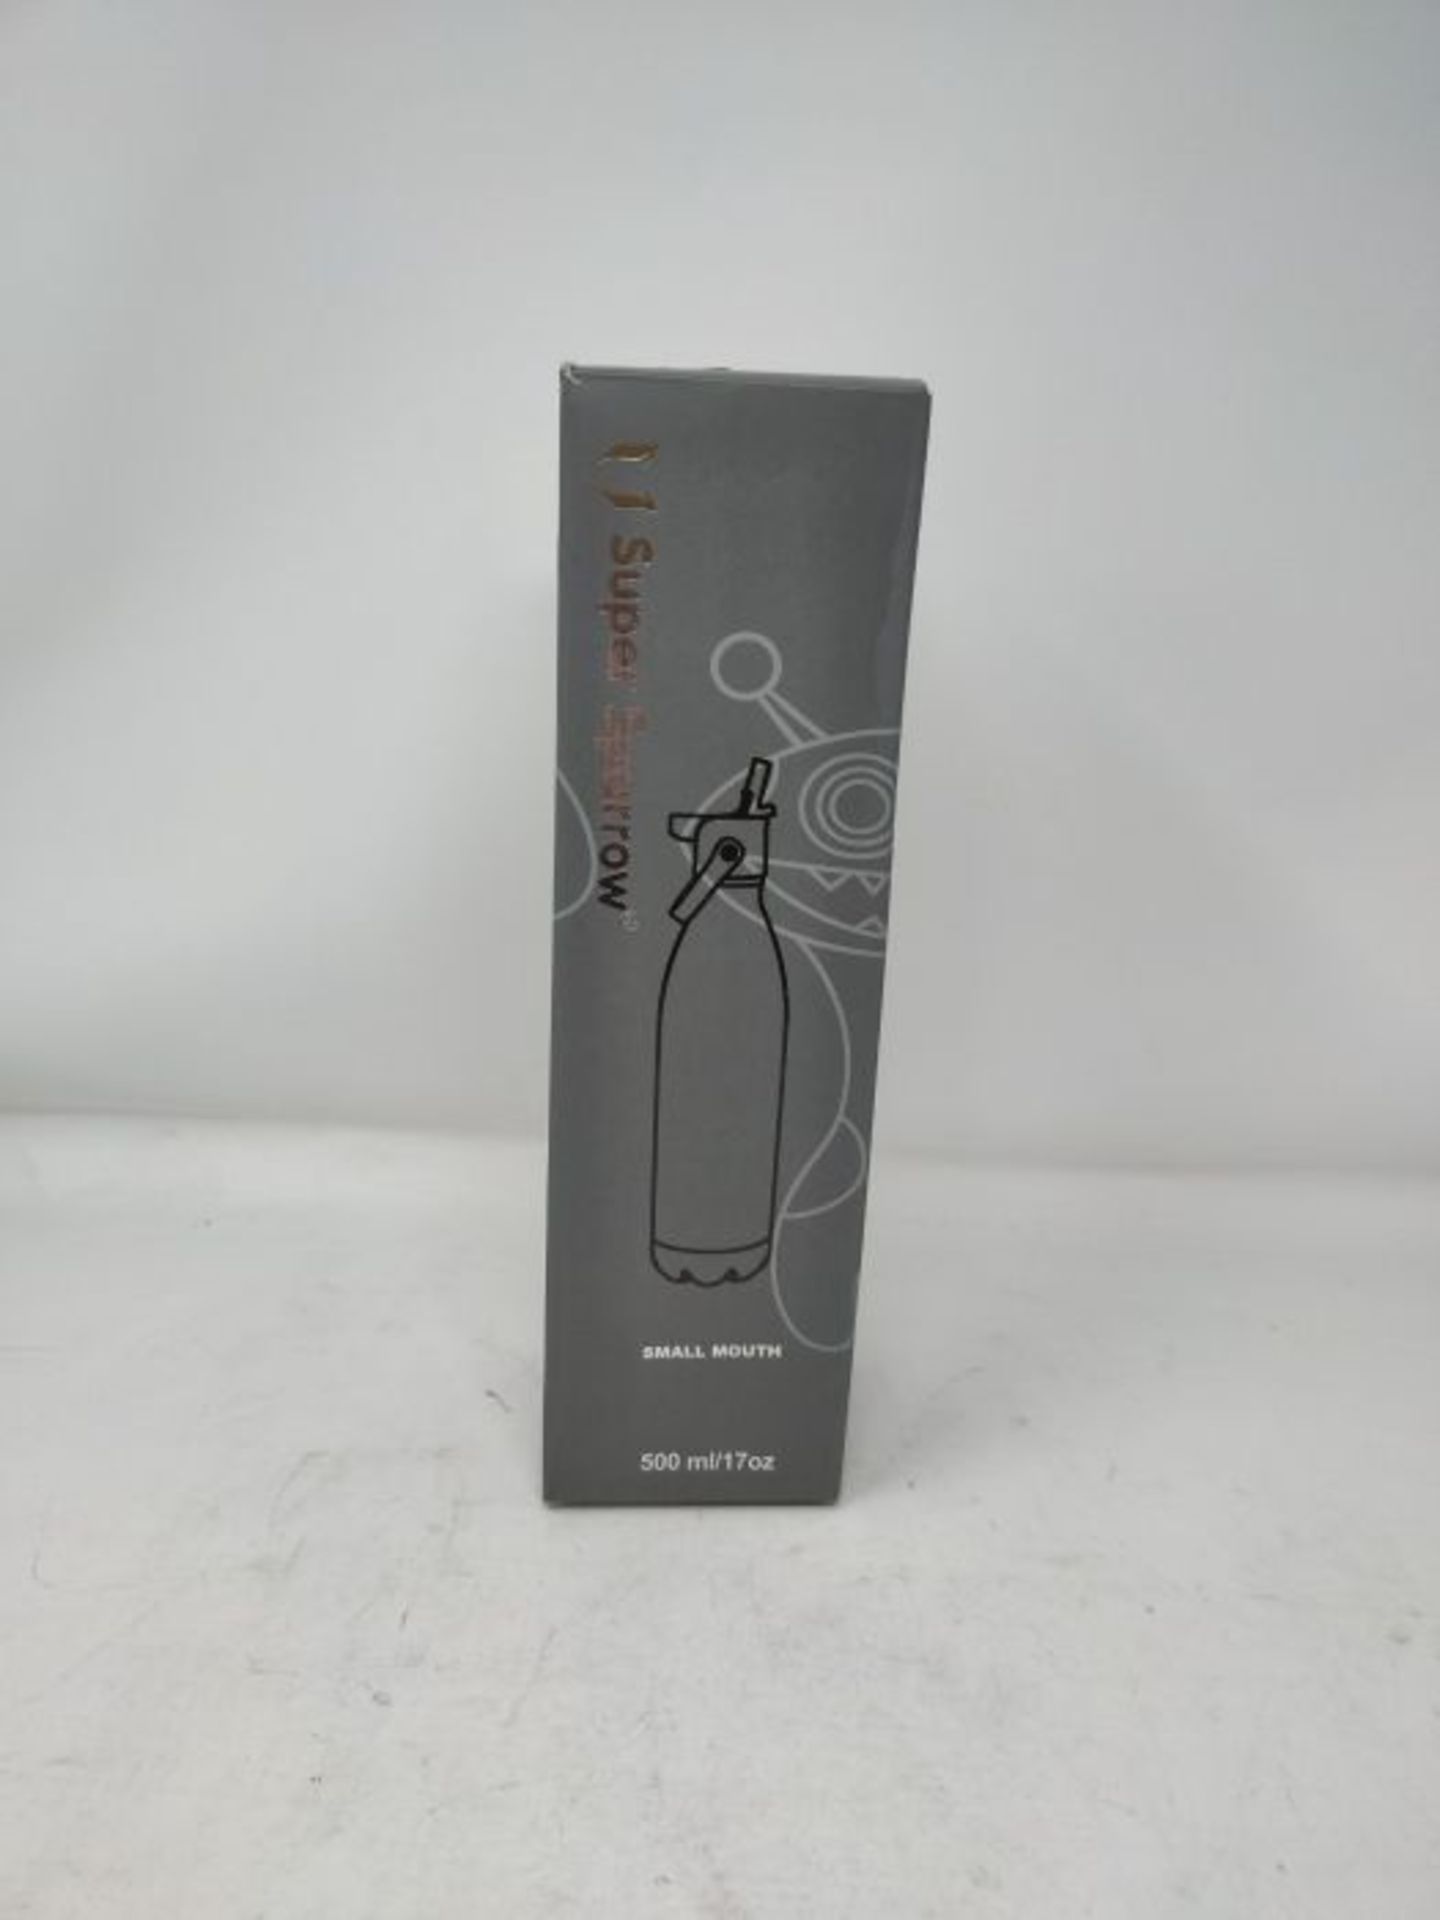 Super Sparrow Water Bottle Double Wall Vacuum Insulated Stainless Steel - Small Mouth - Image 2 of 3